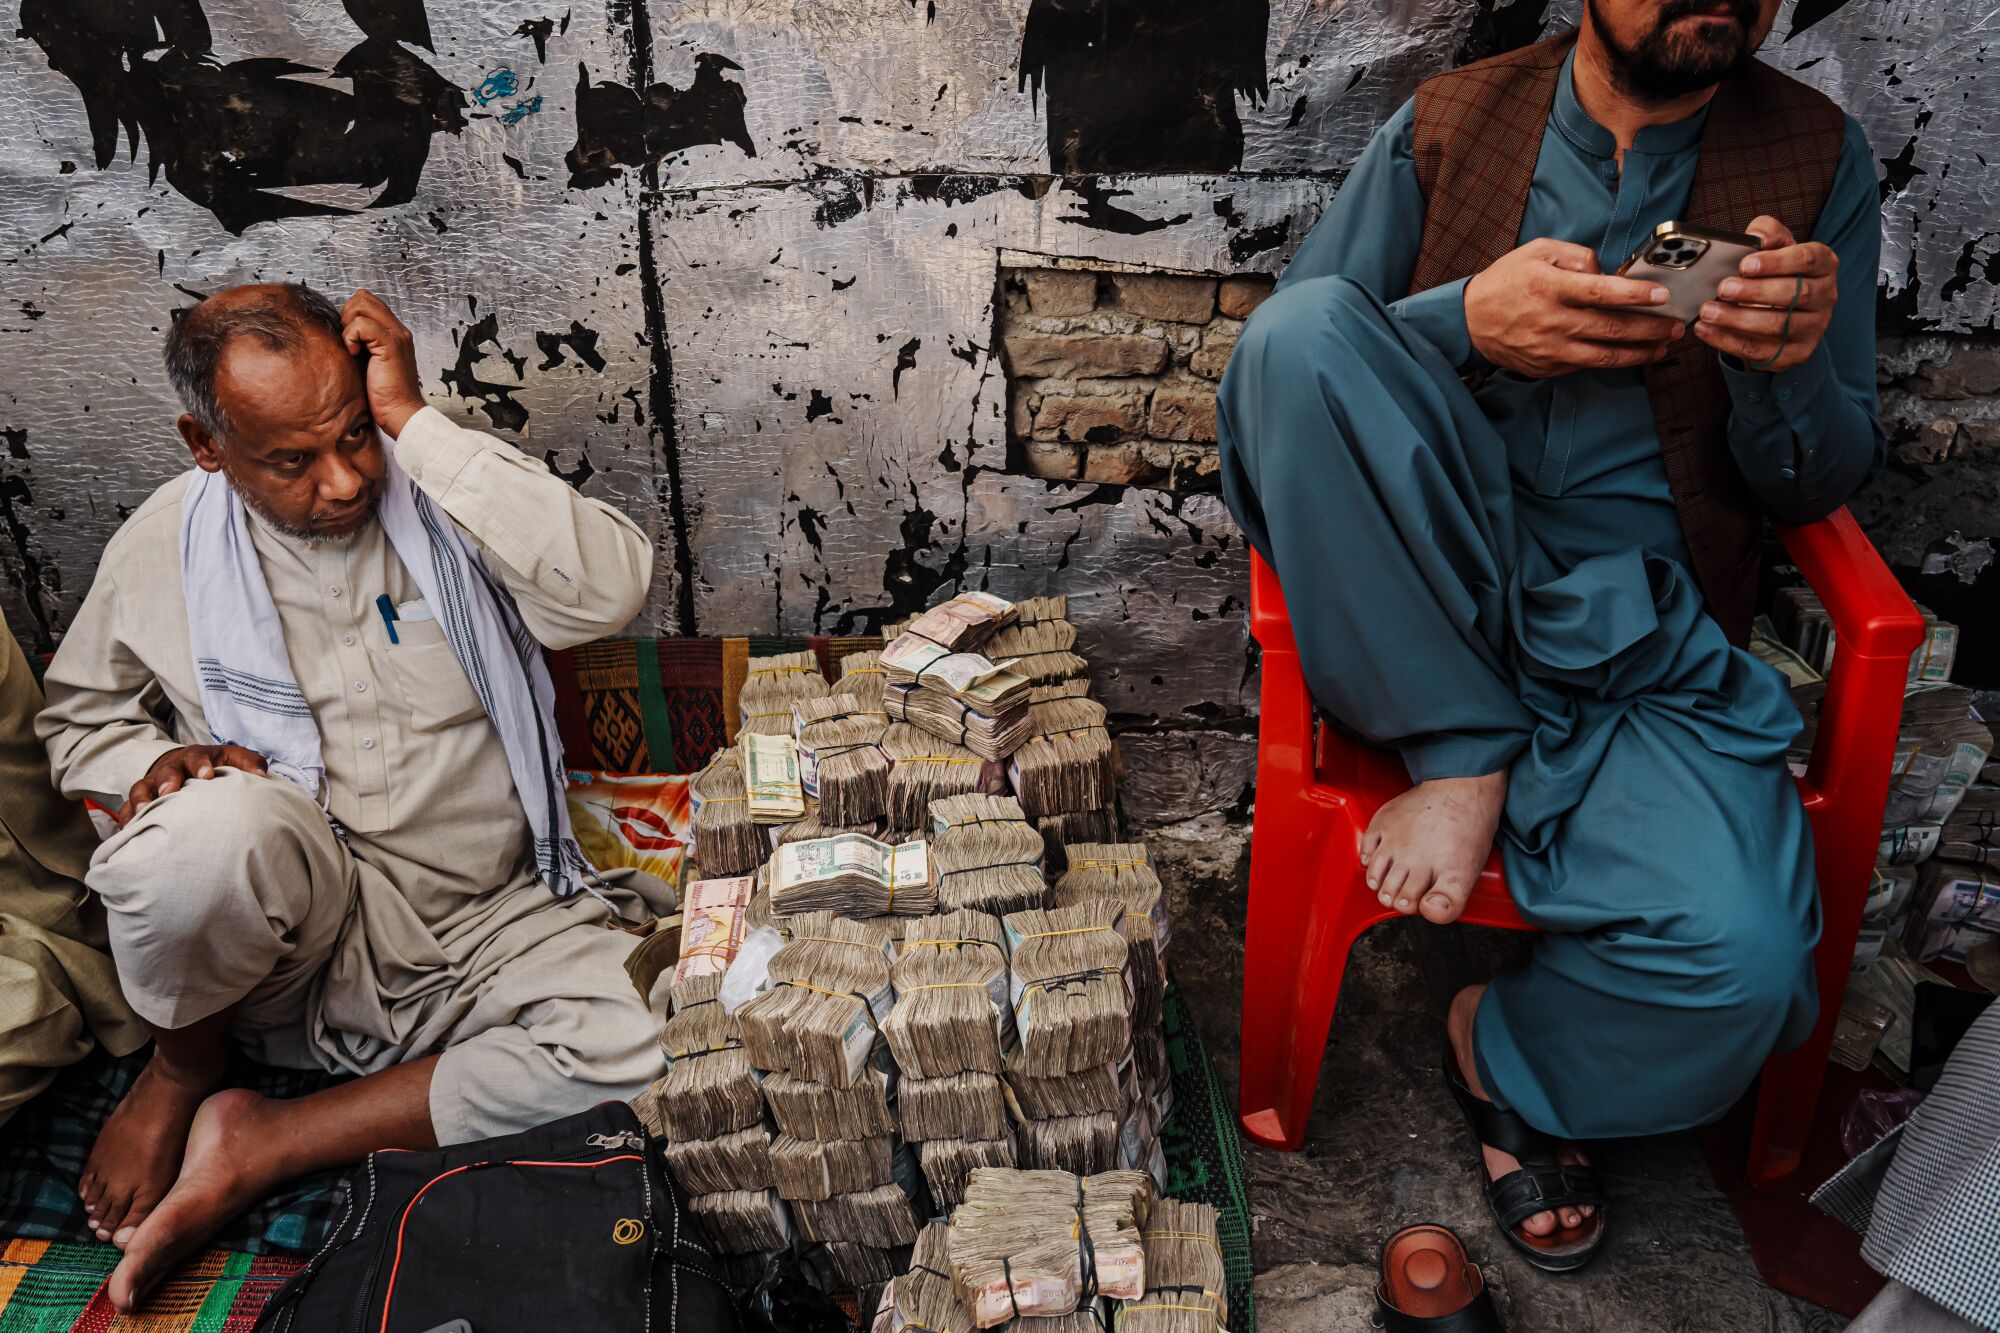 Money-changers next to stacks of Afghan currency